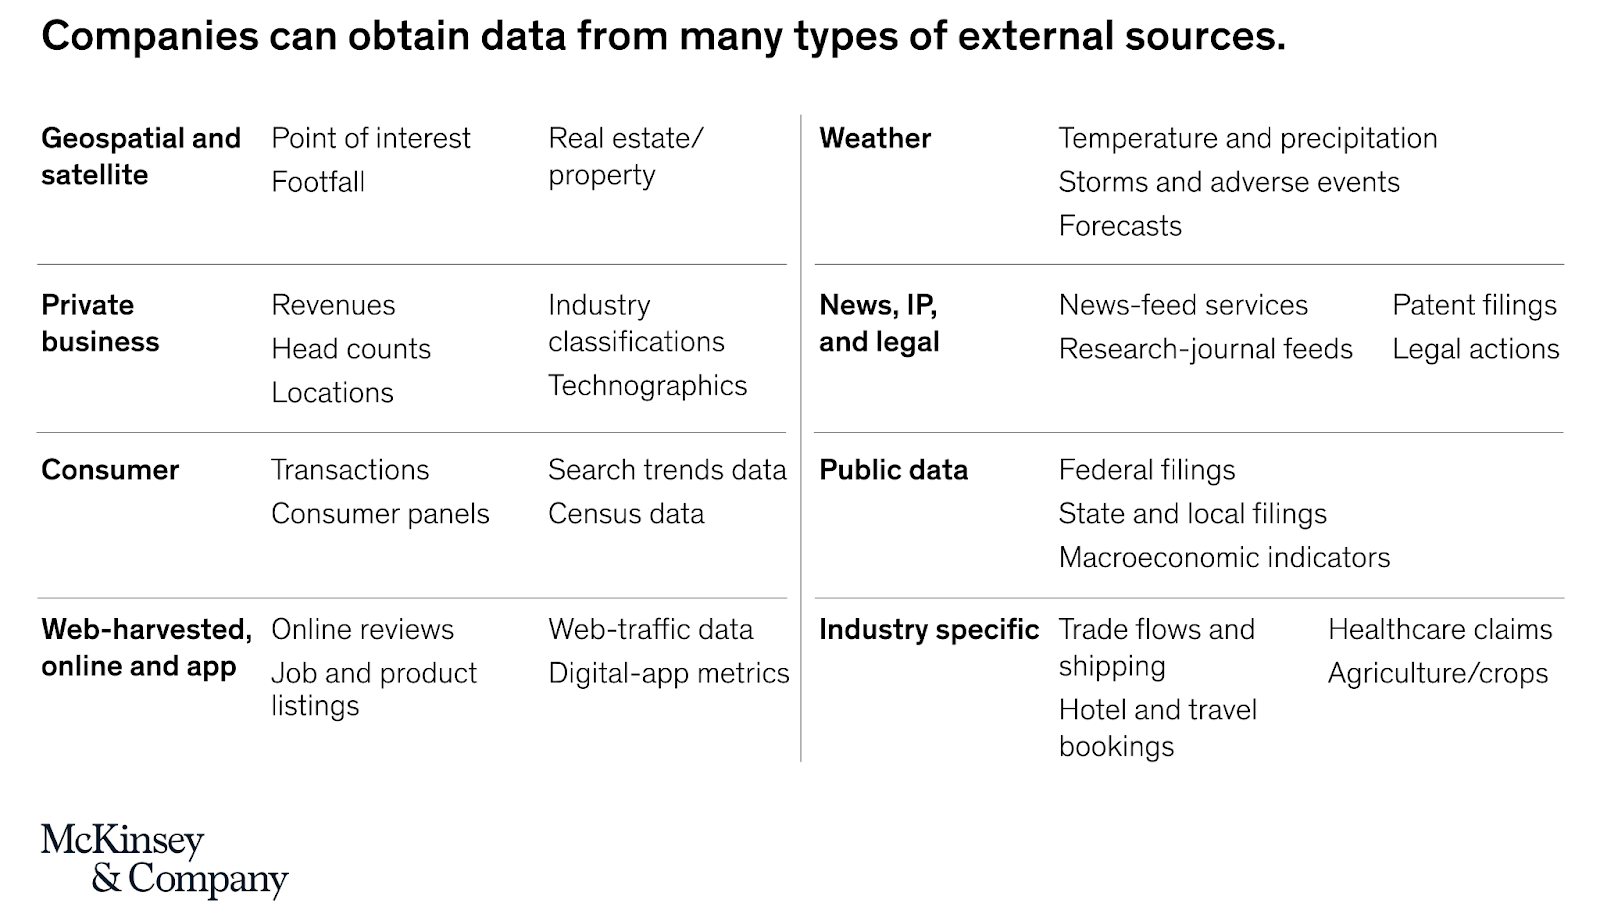 Commonly used external data from a report by McKinsey & Company